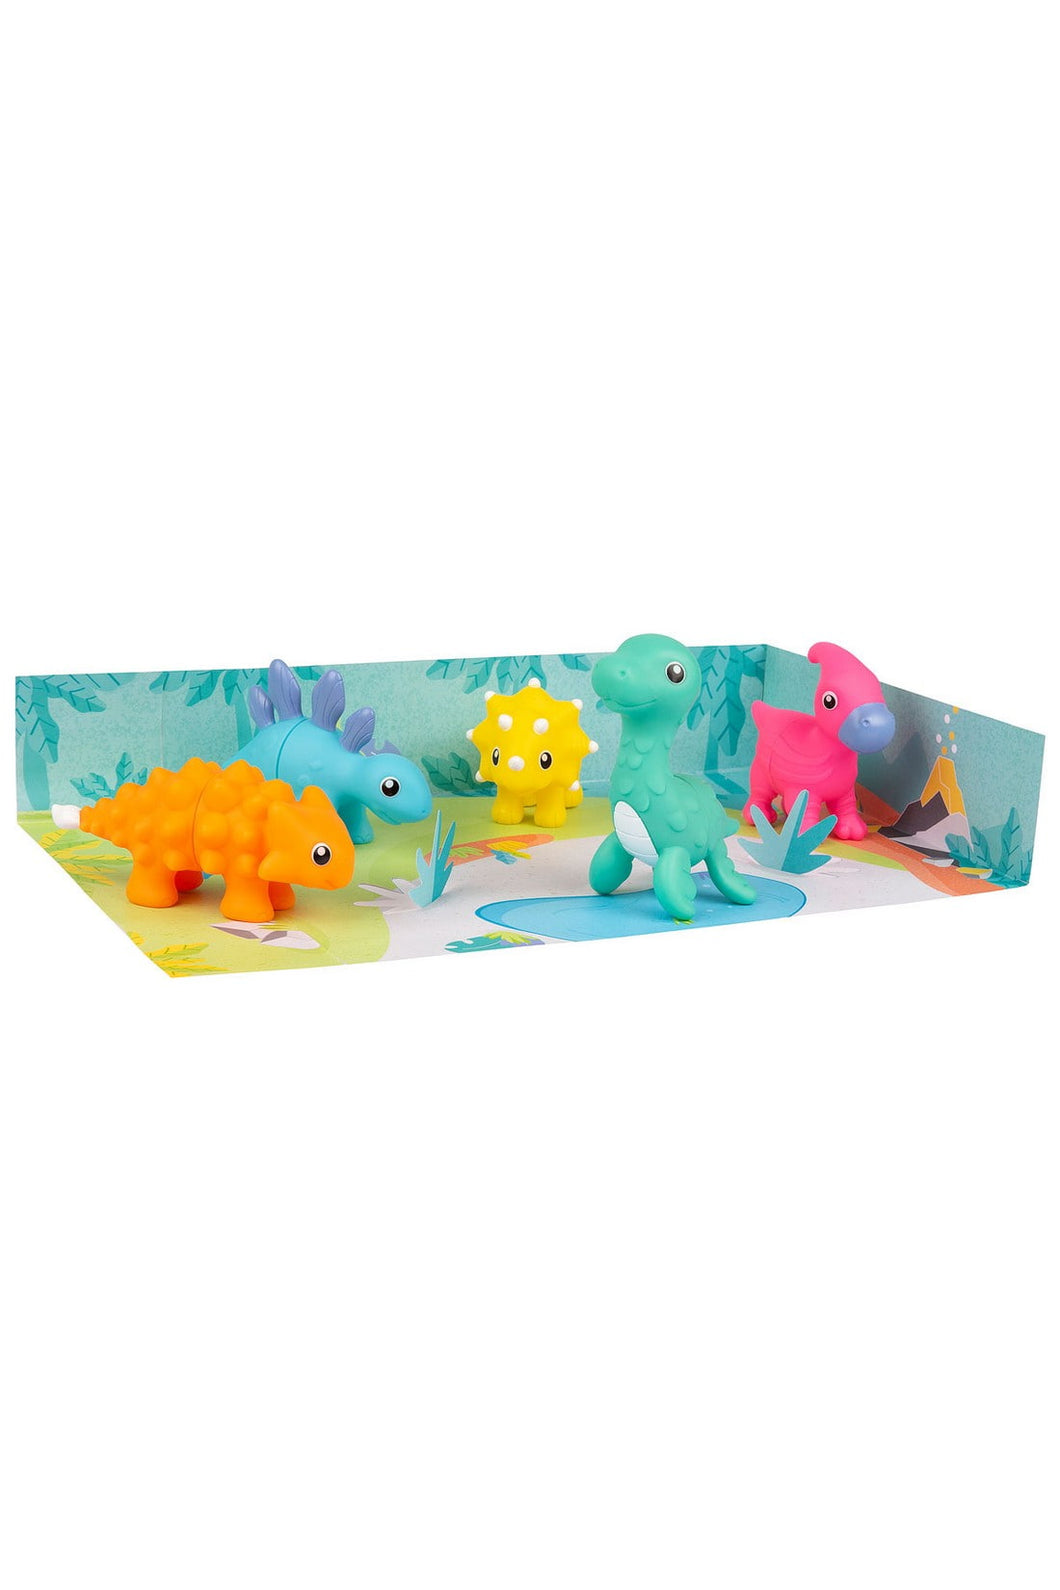 Playgro Build And Play Mix N Match Dinosaurs 1